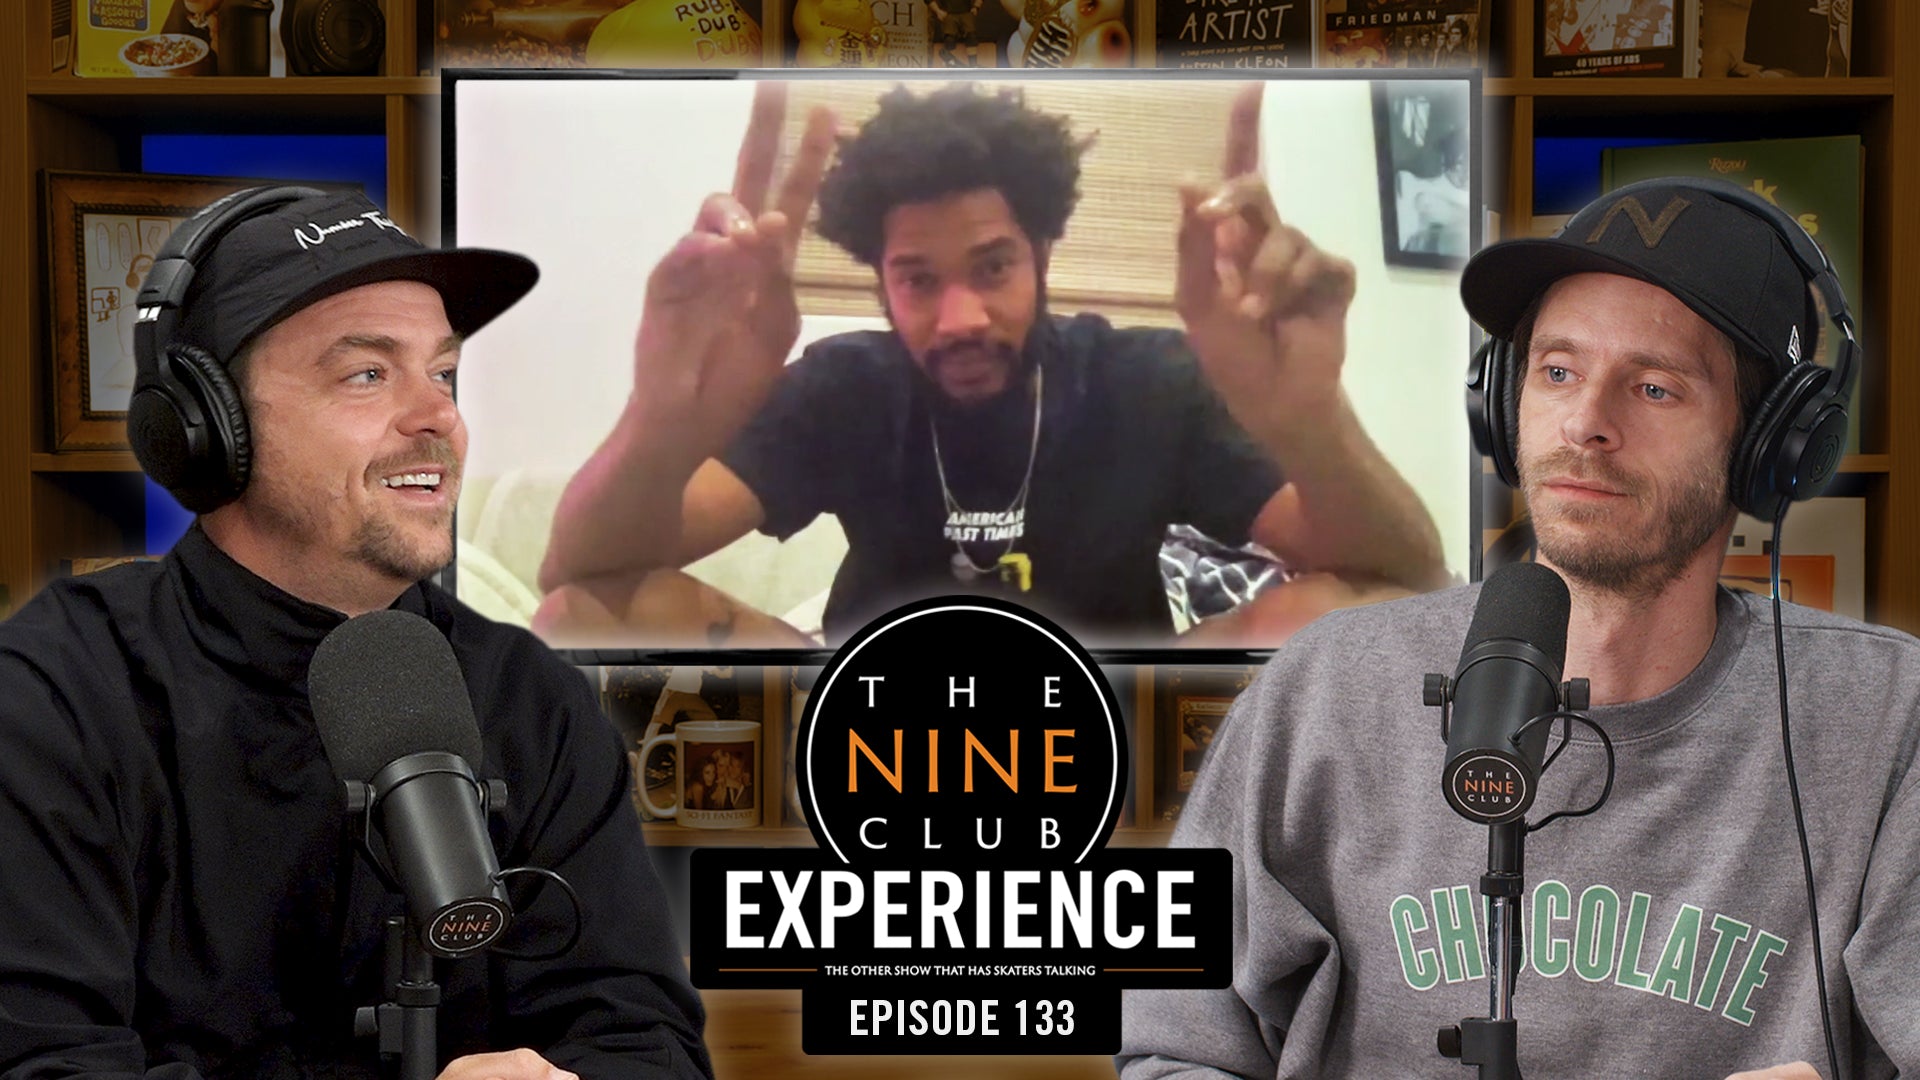 The Nine Club Experience Episode 133